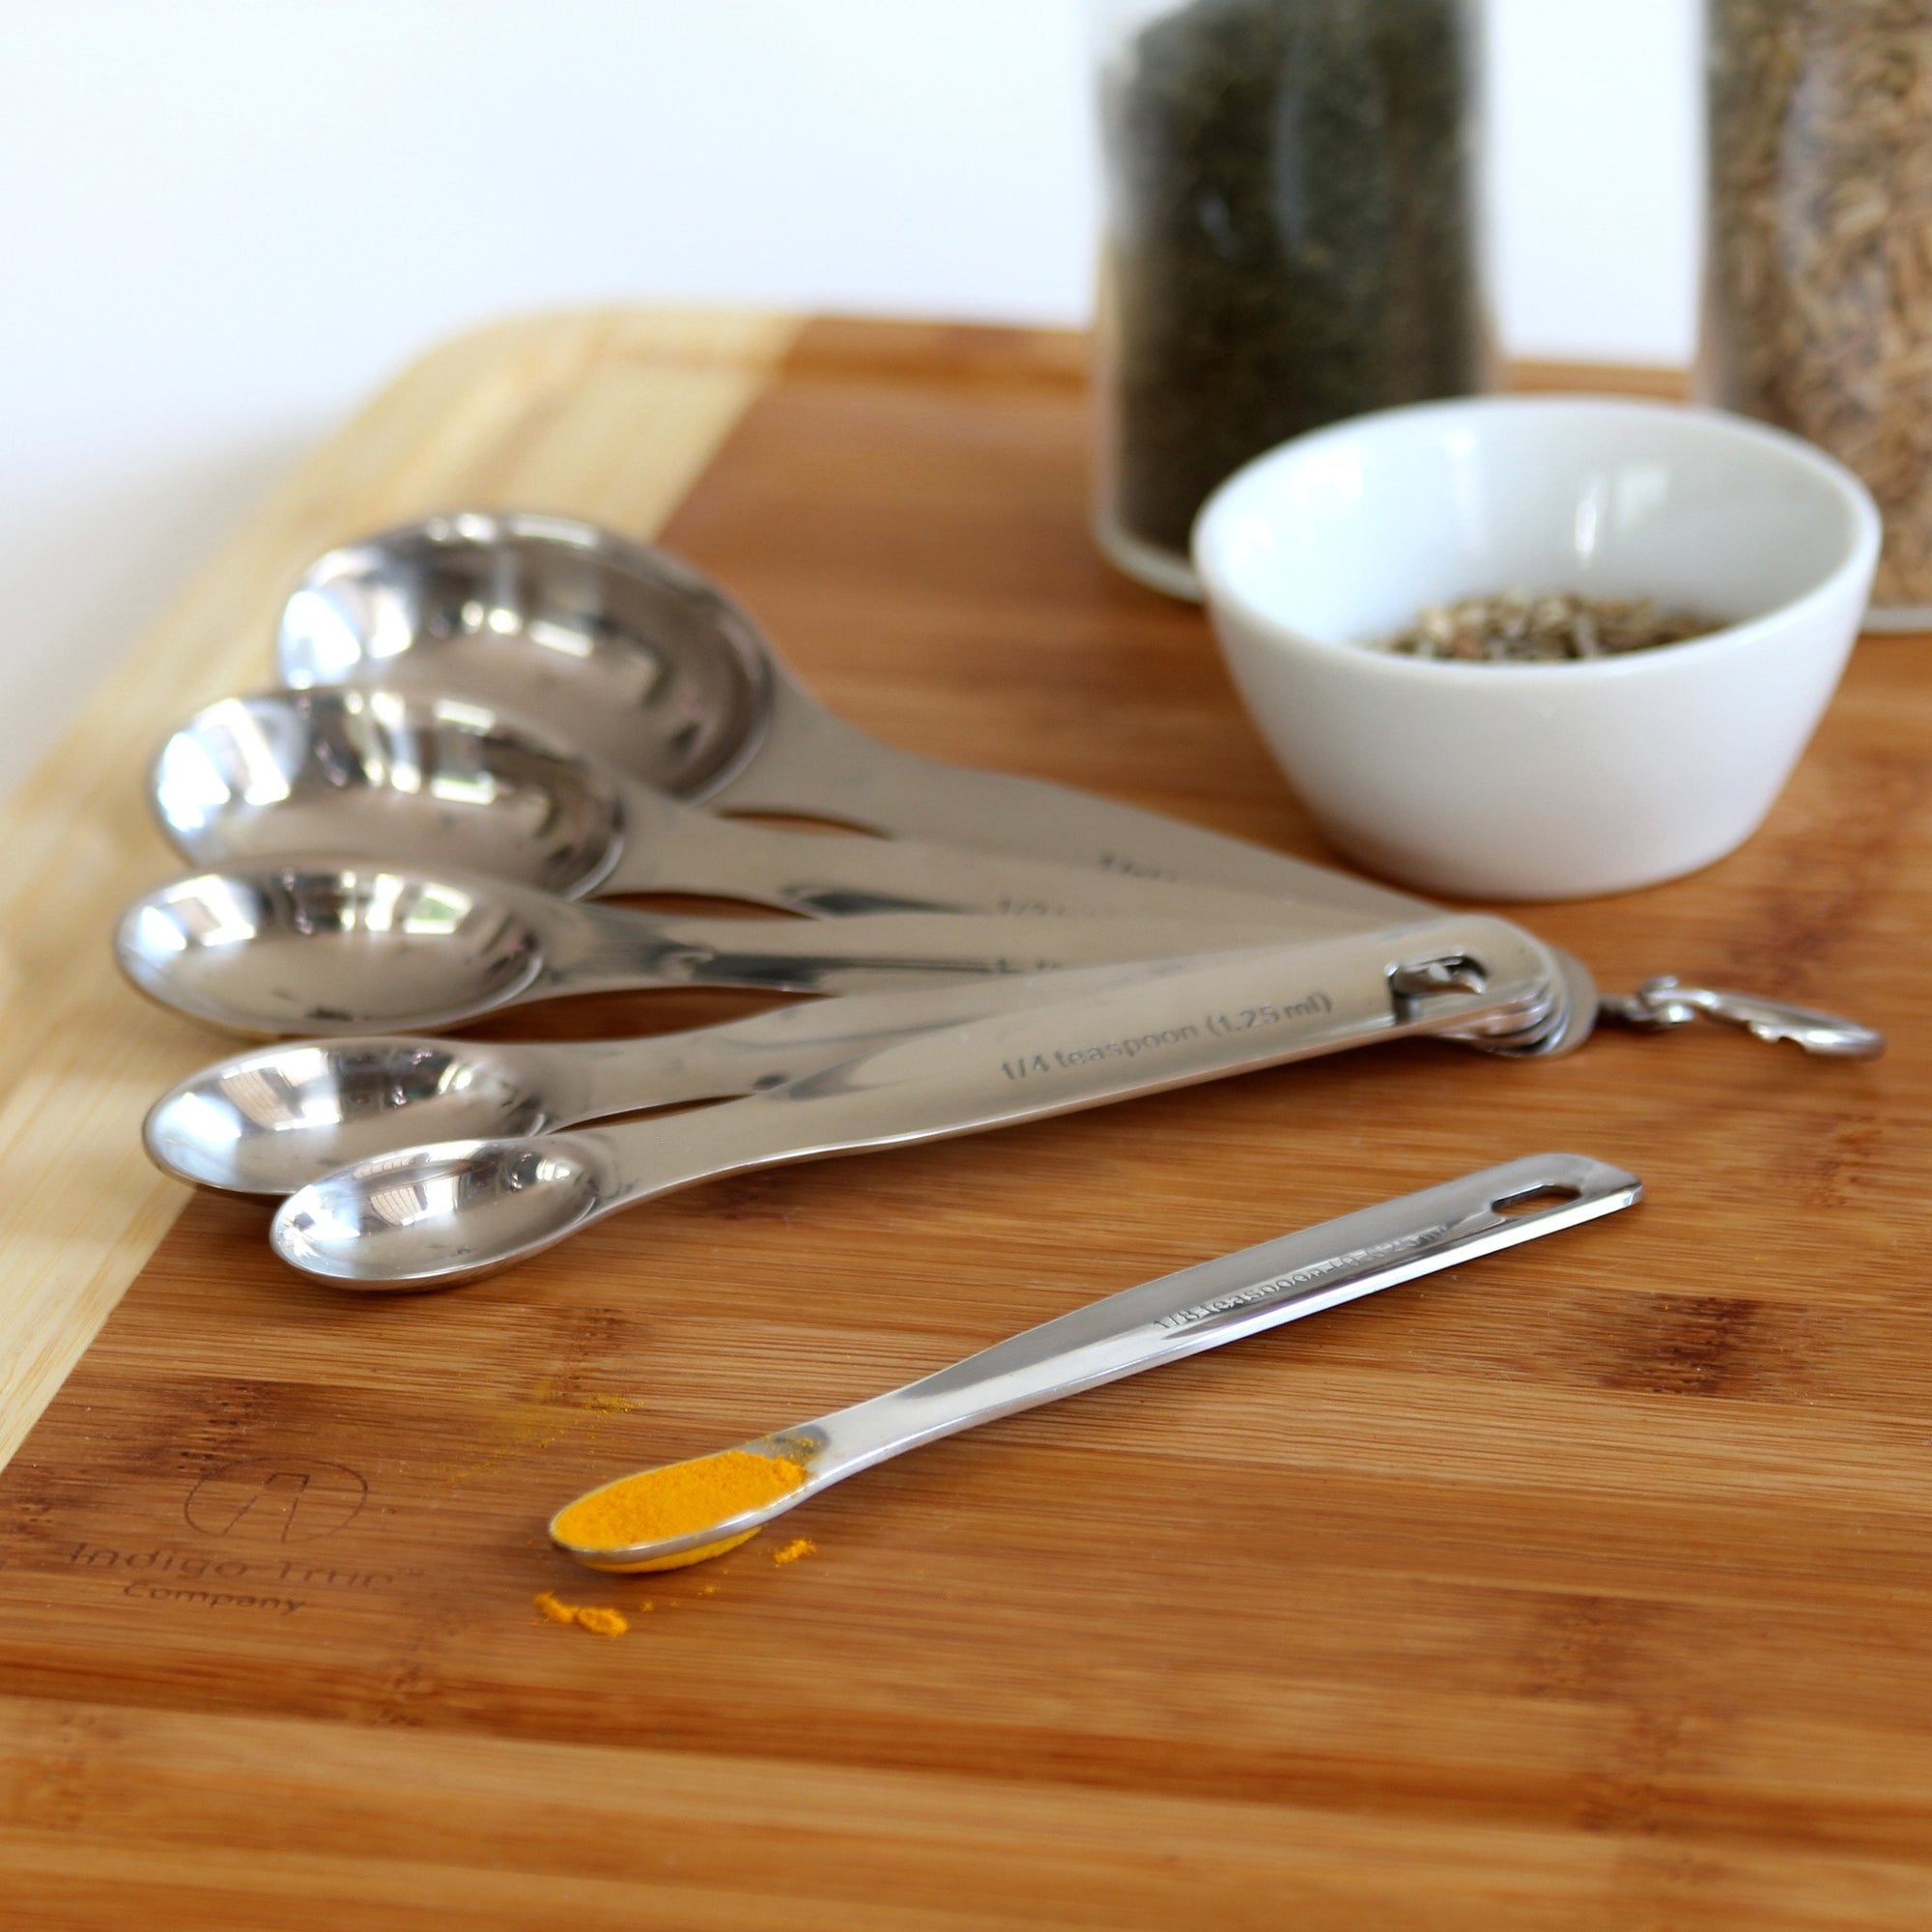 Measuring Spoons, Stainless Steel 4-piece Measuring Spoon Cups Set